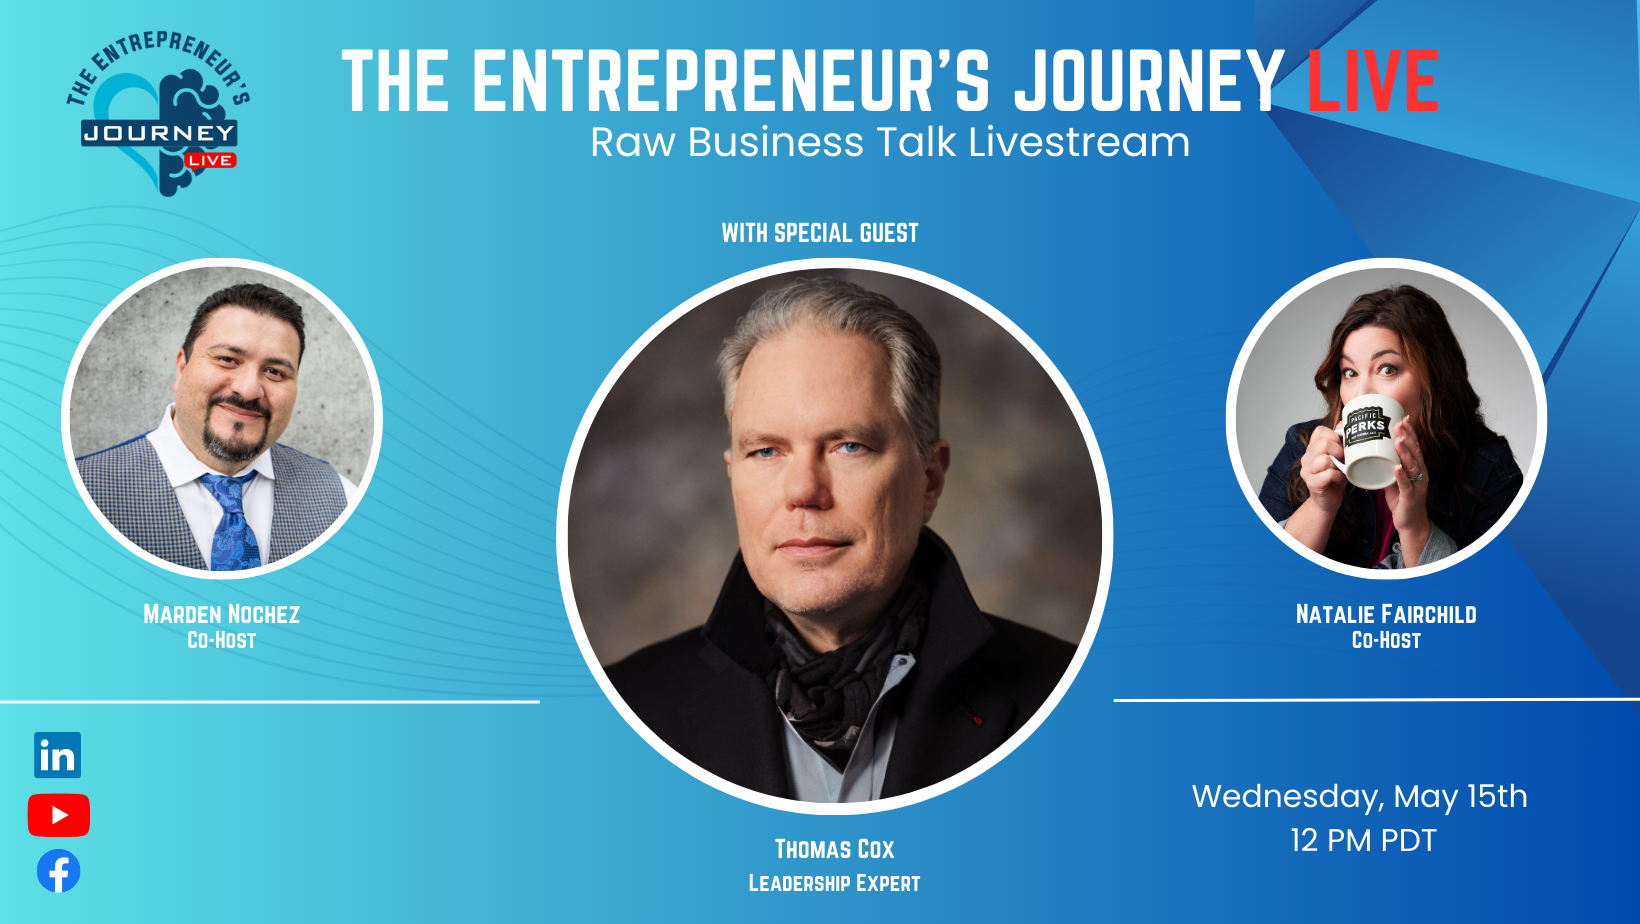 The Entrepreneur's Journey - LIVE podcast with Marden Nochez and Natalie Fairchild with Thomas Cox